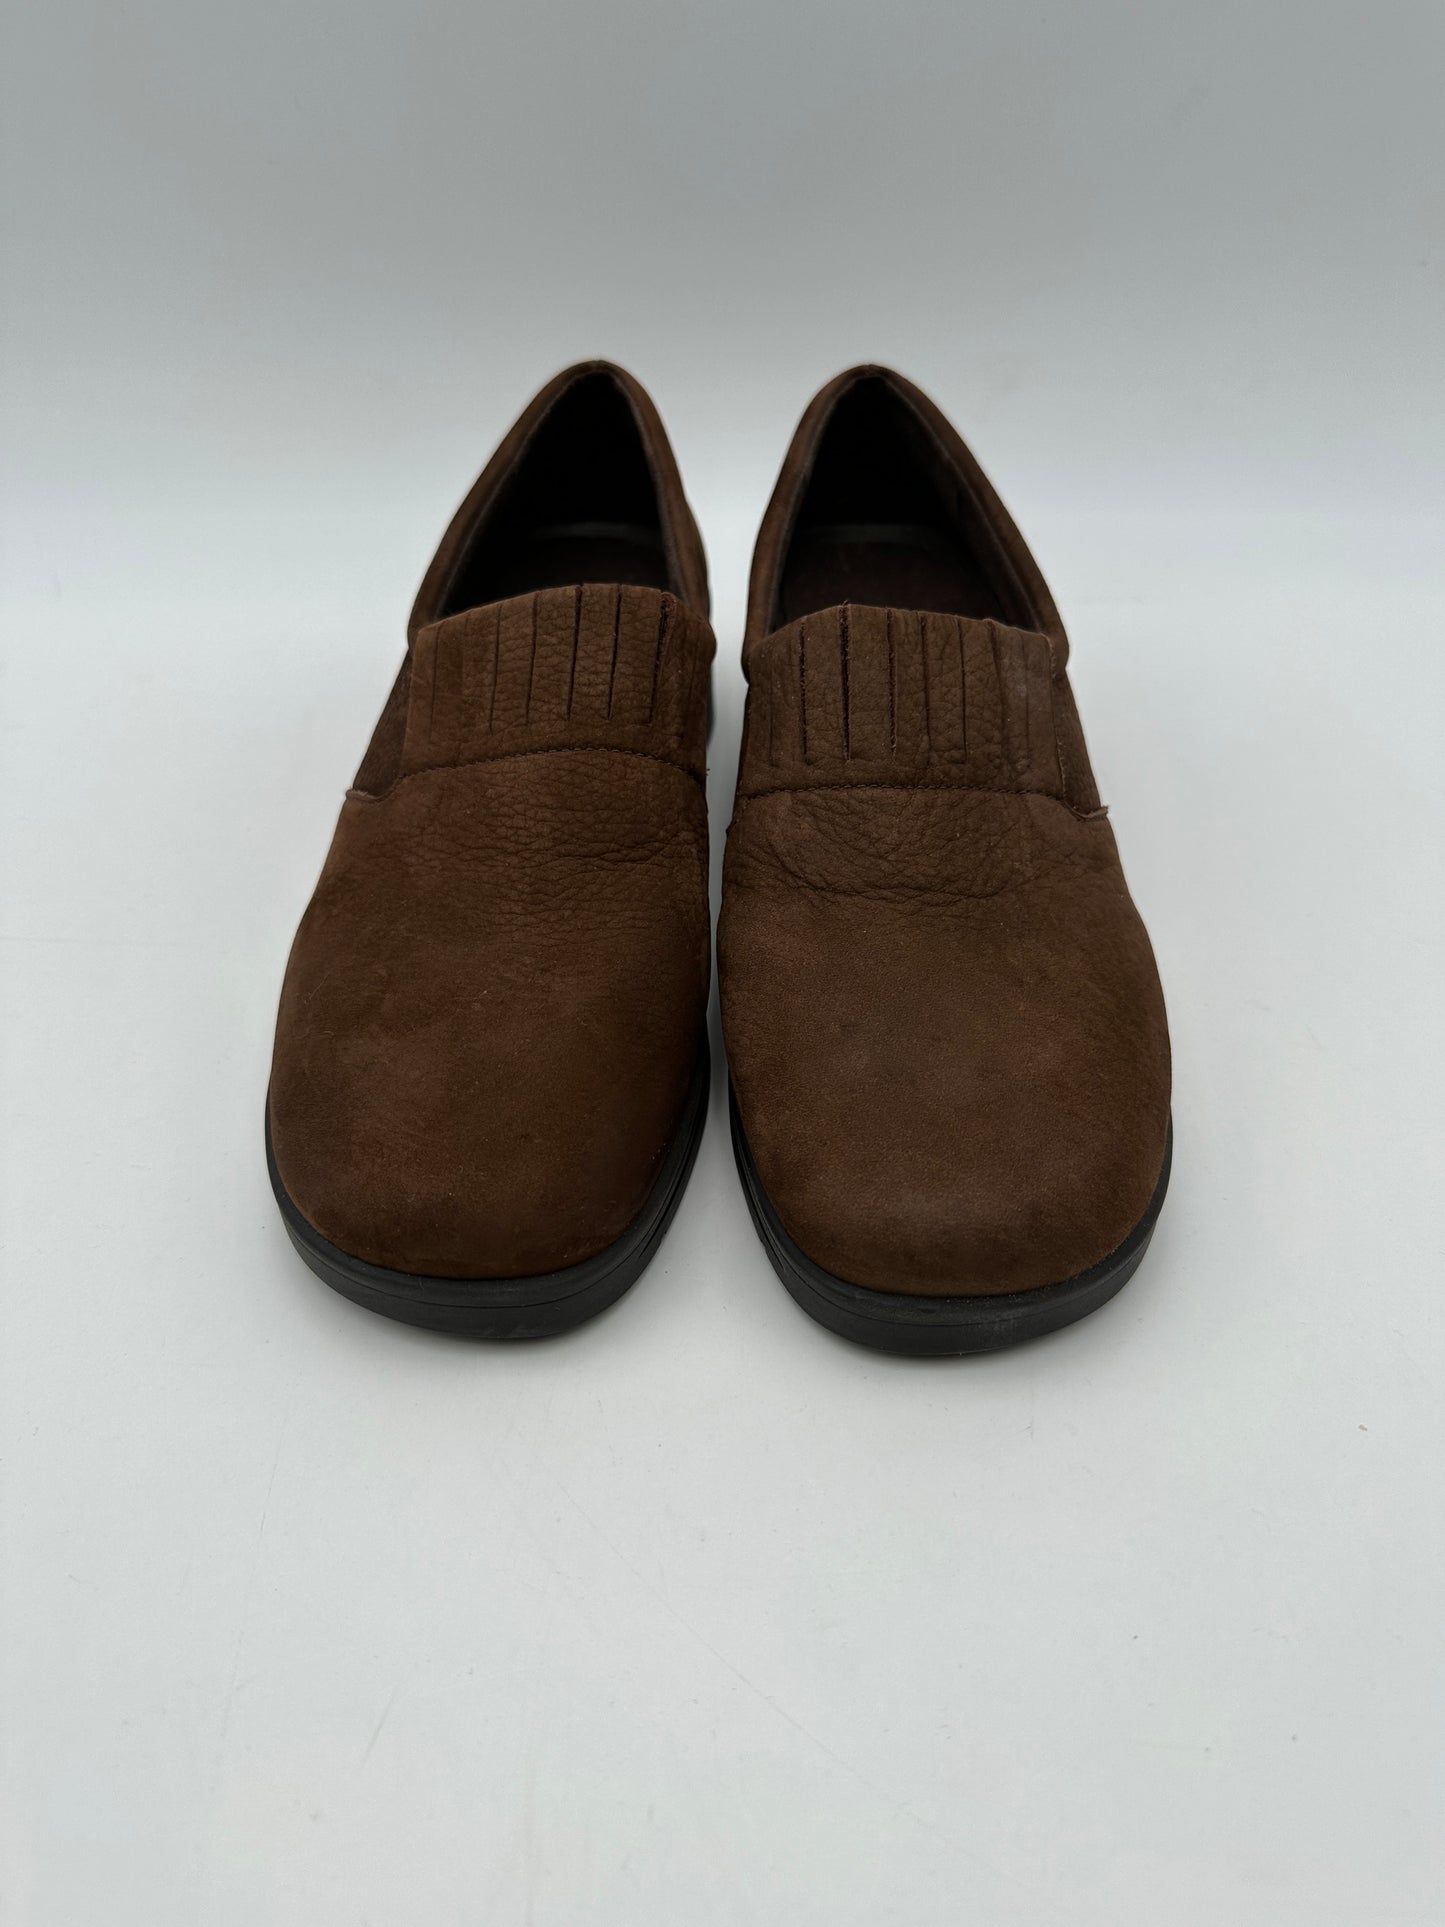 Selby Active Flex Size 7 B Brown Suede "Bianca" Slip-On Shoes, 1.25" heel